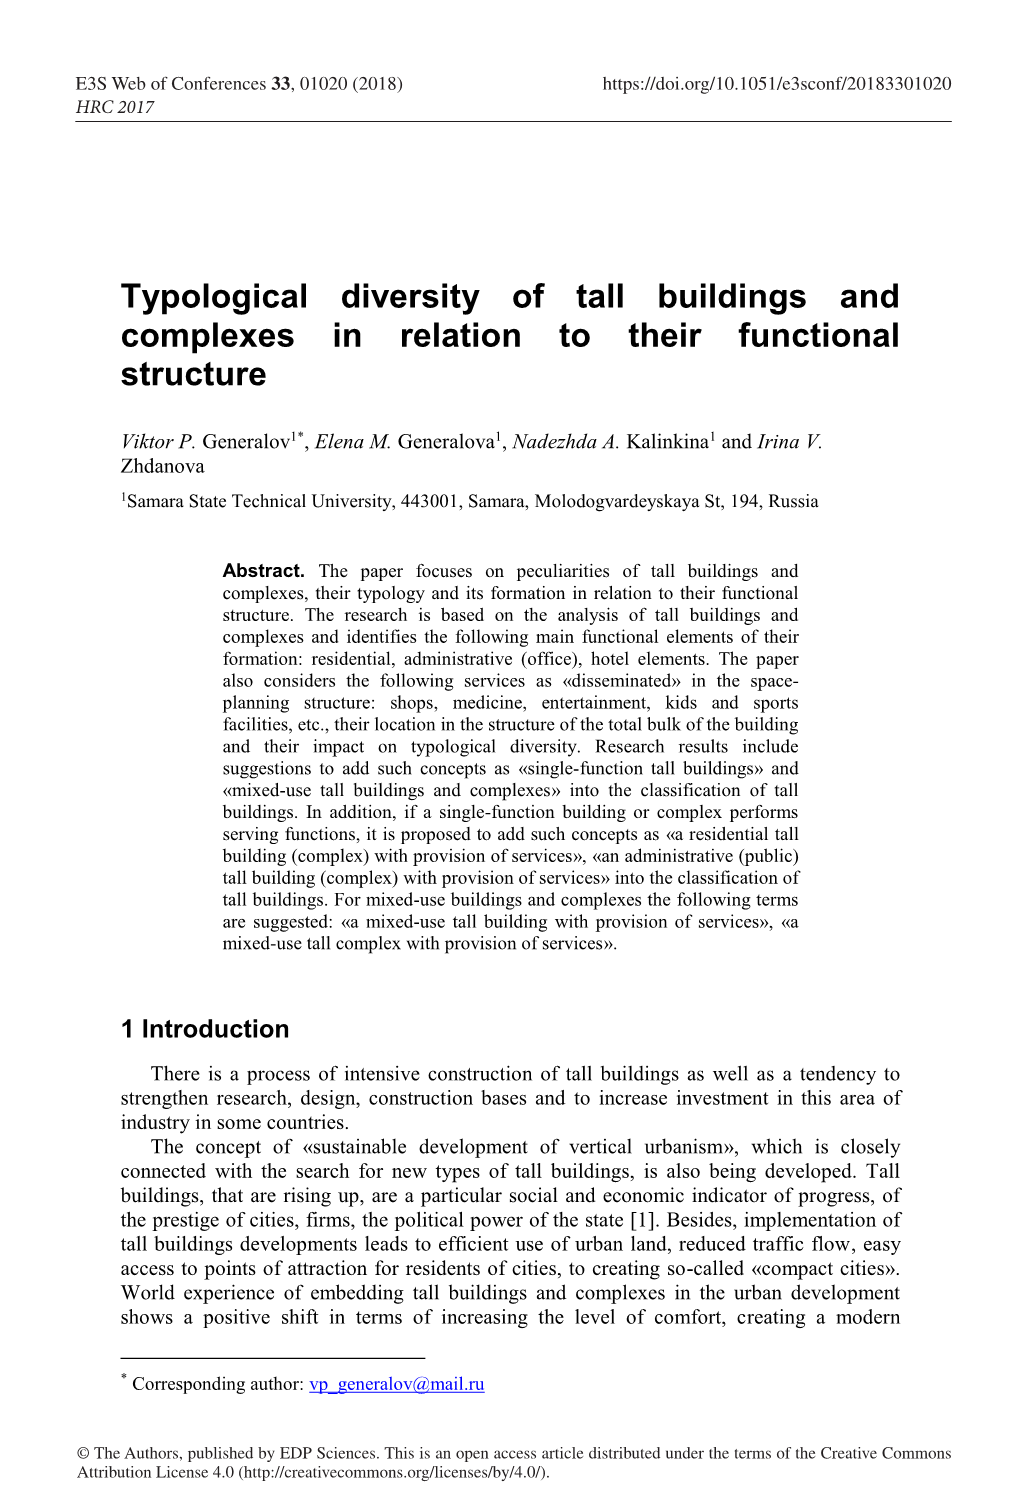 Typological Diversity of Tall Buildings and Complexes in Relation to Their Functional Structure